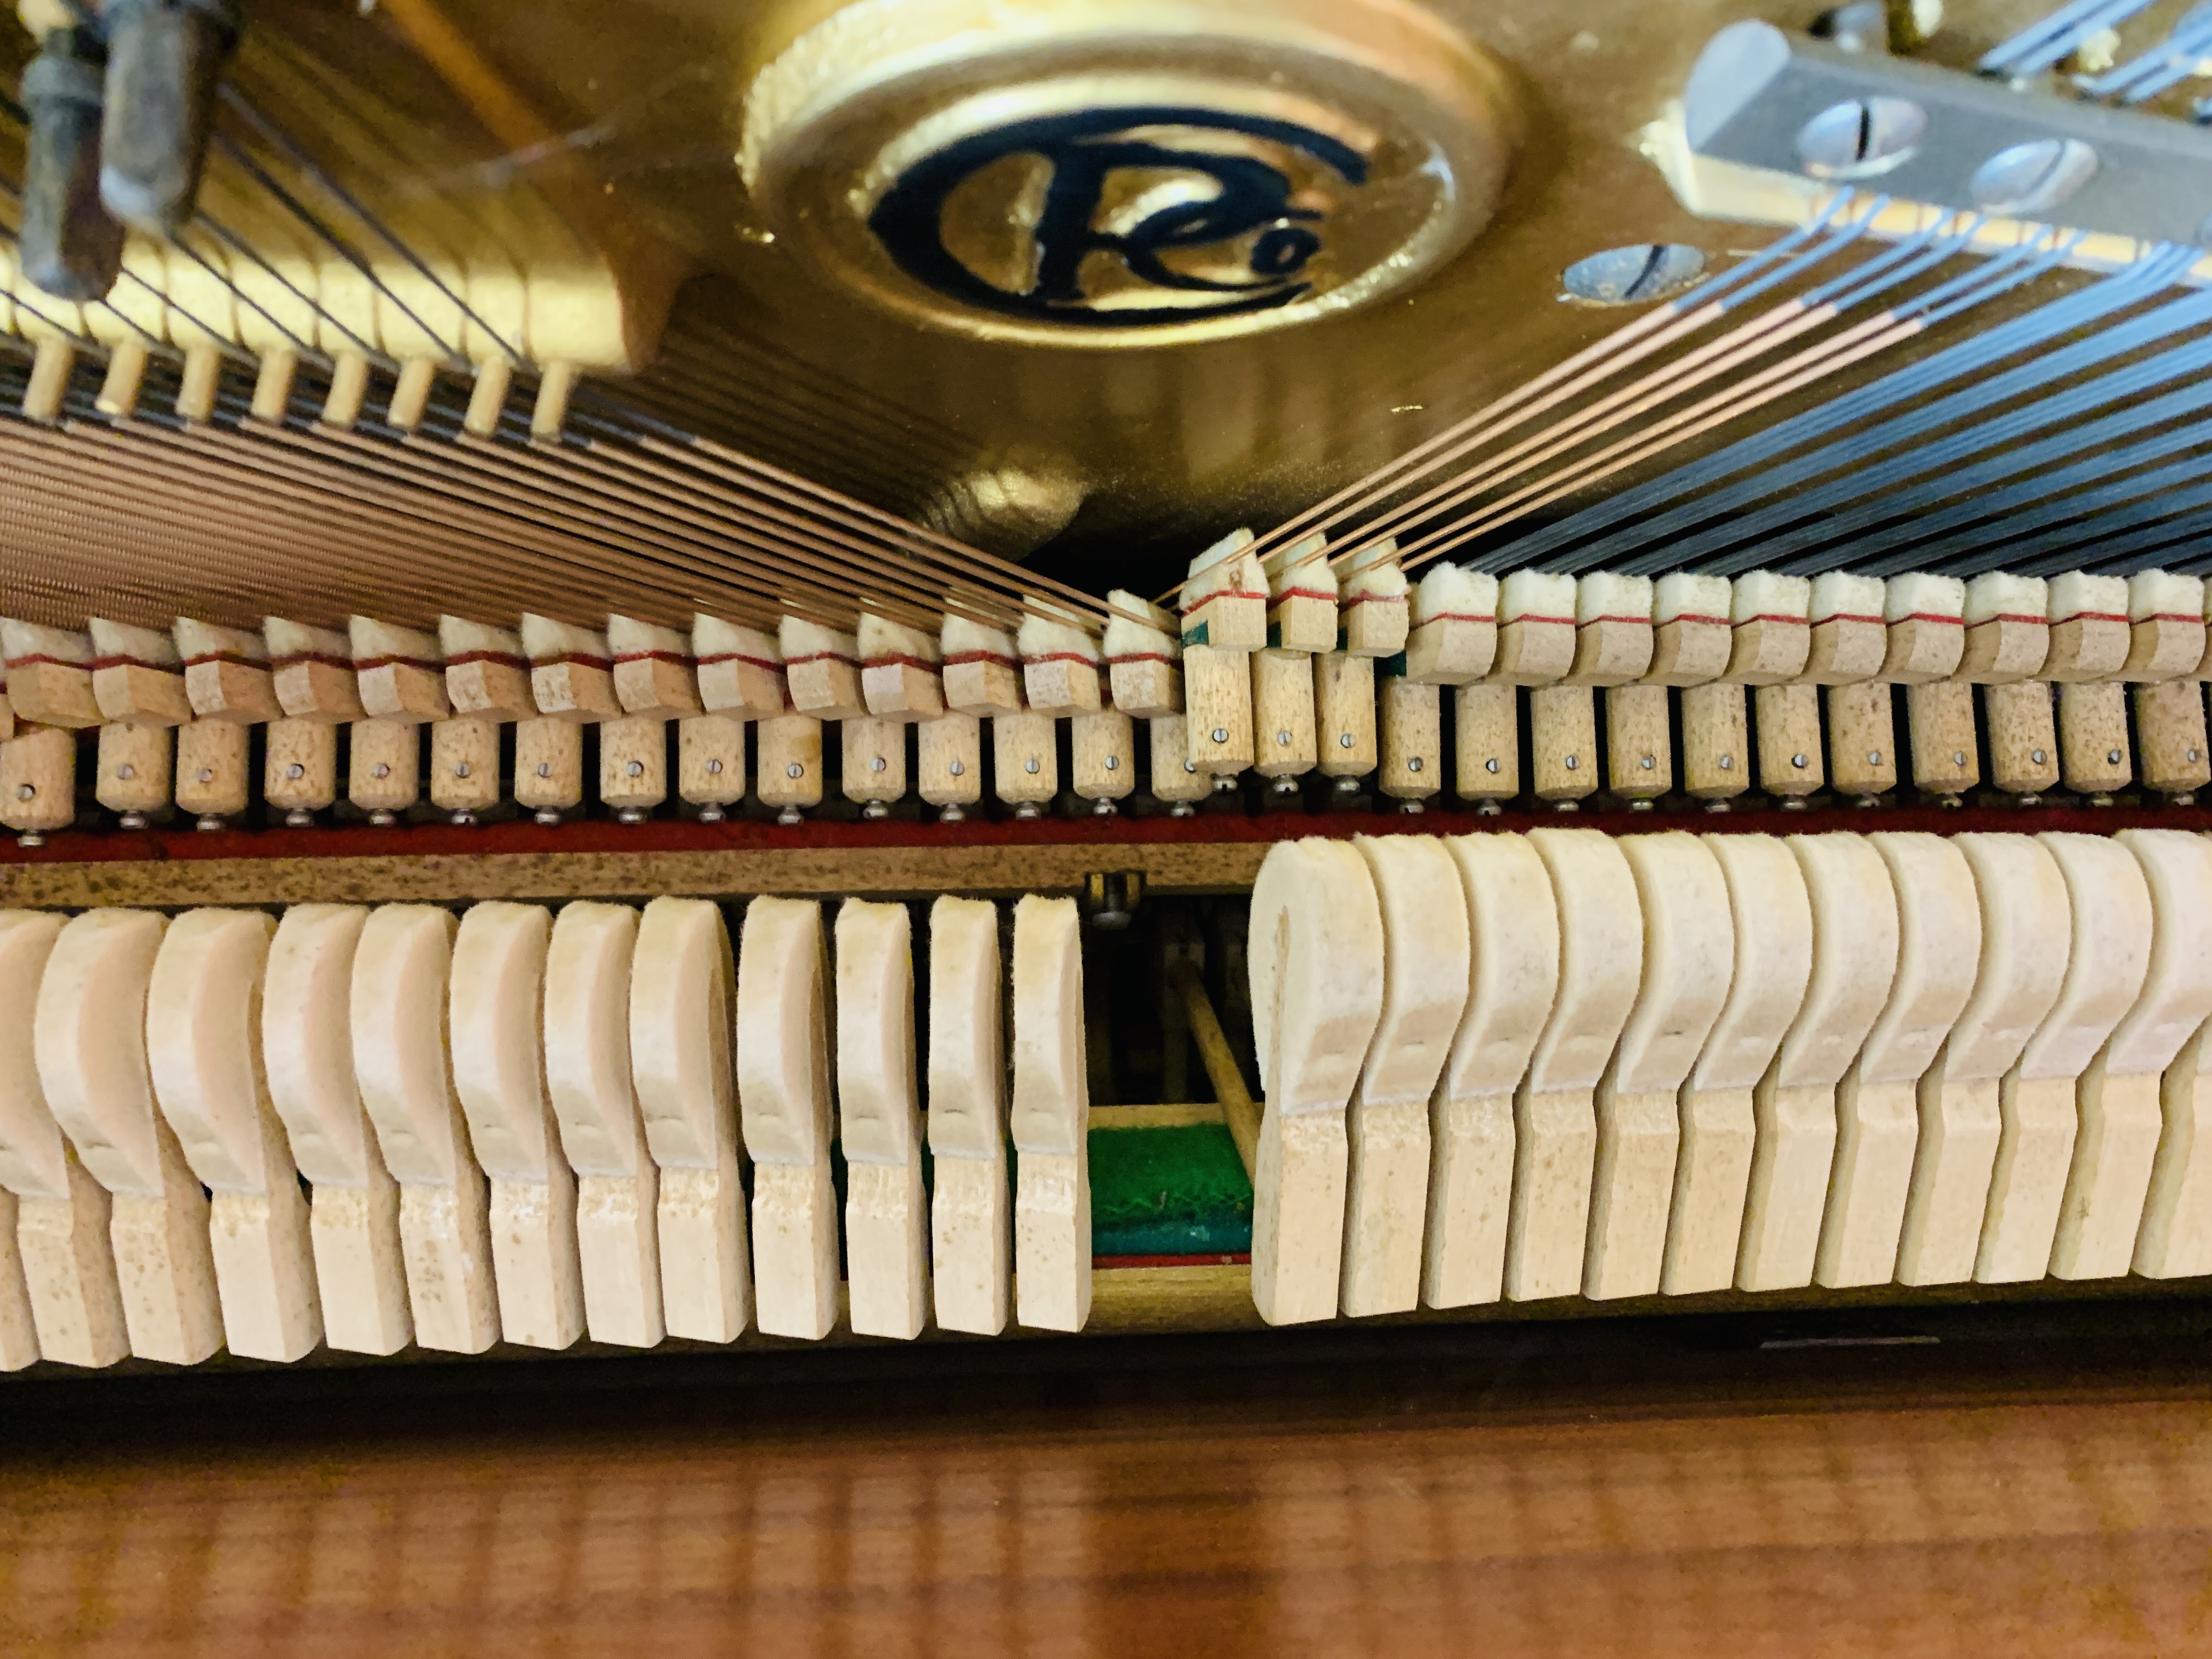 A CHAPPELL UPRIGHT OVERSTRUNG PIANO - Image 16 of 16